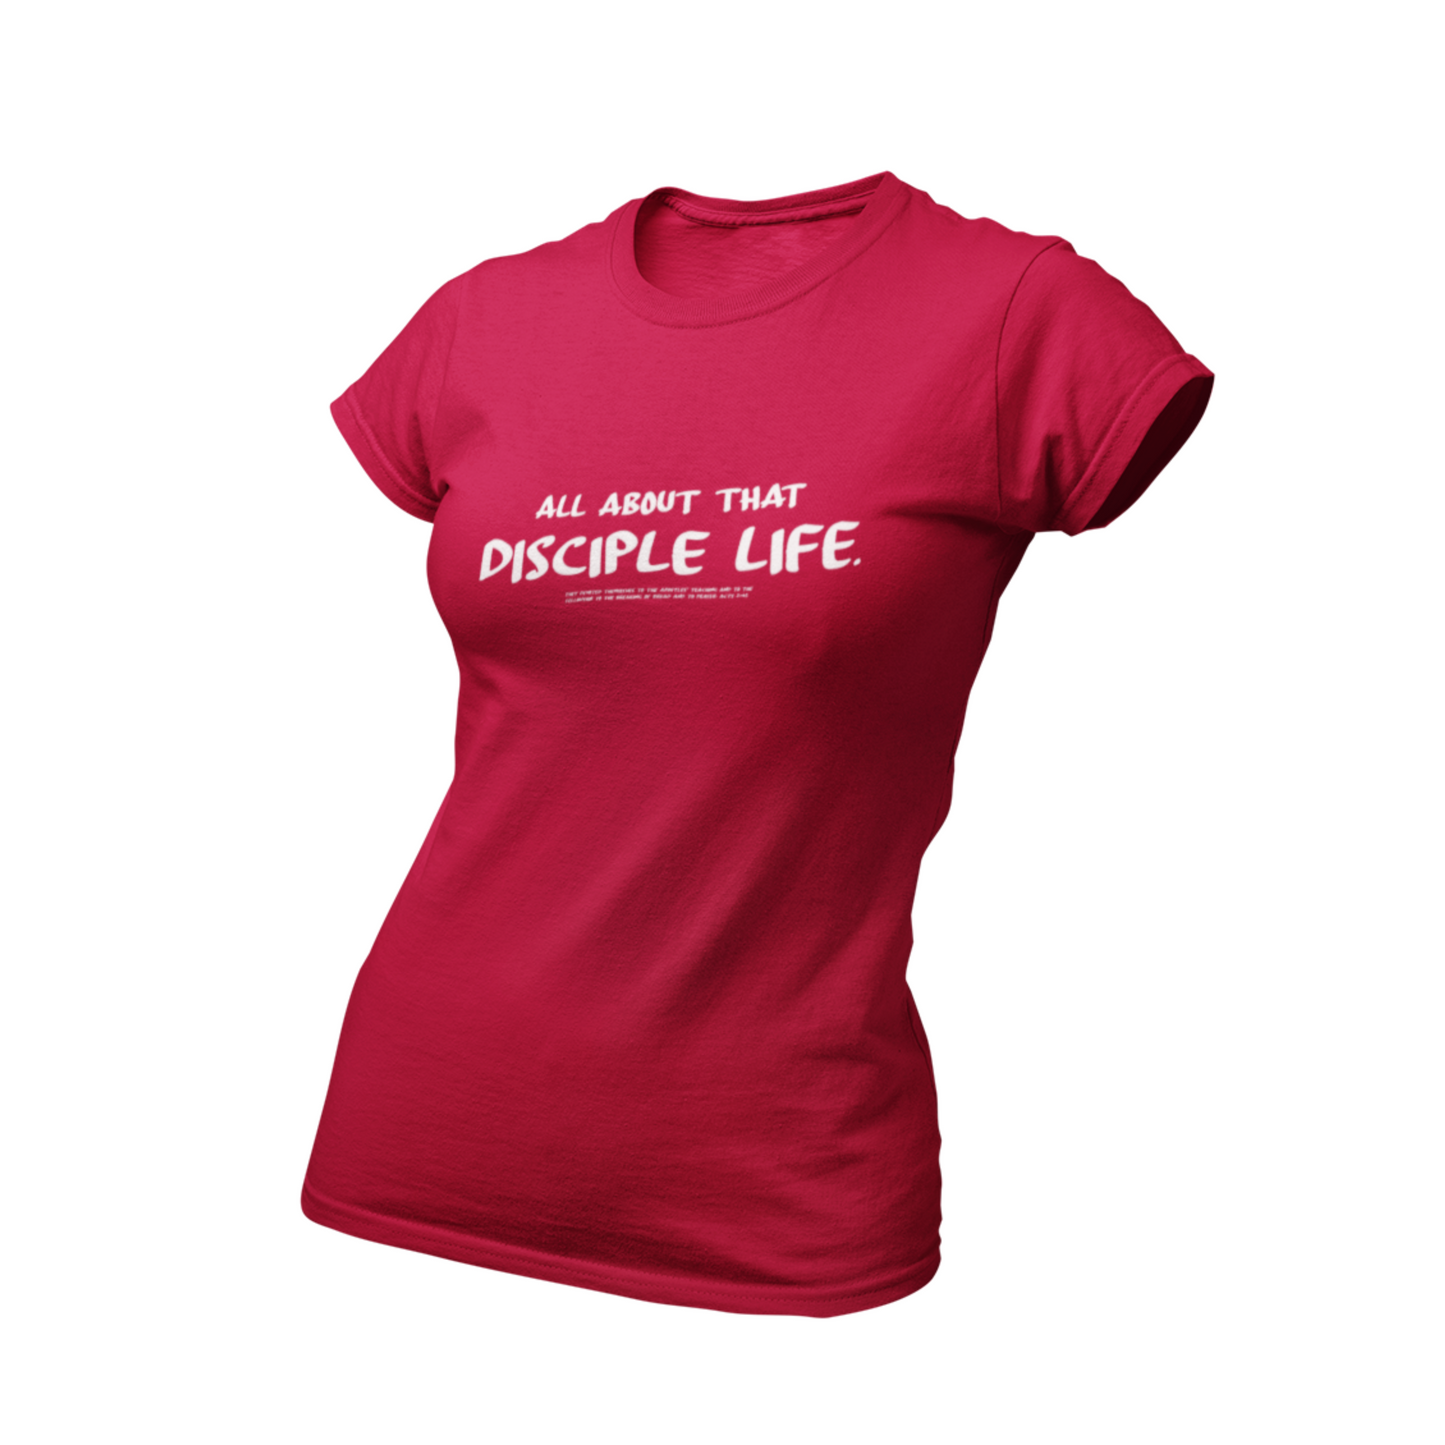 All about that Disciple Life. Ladies T Shirt.